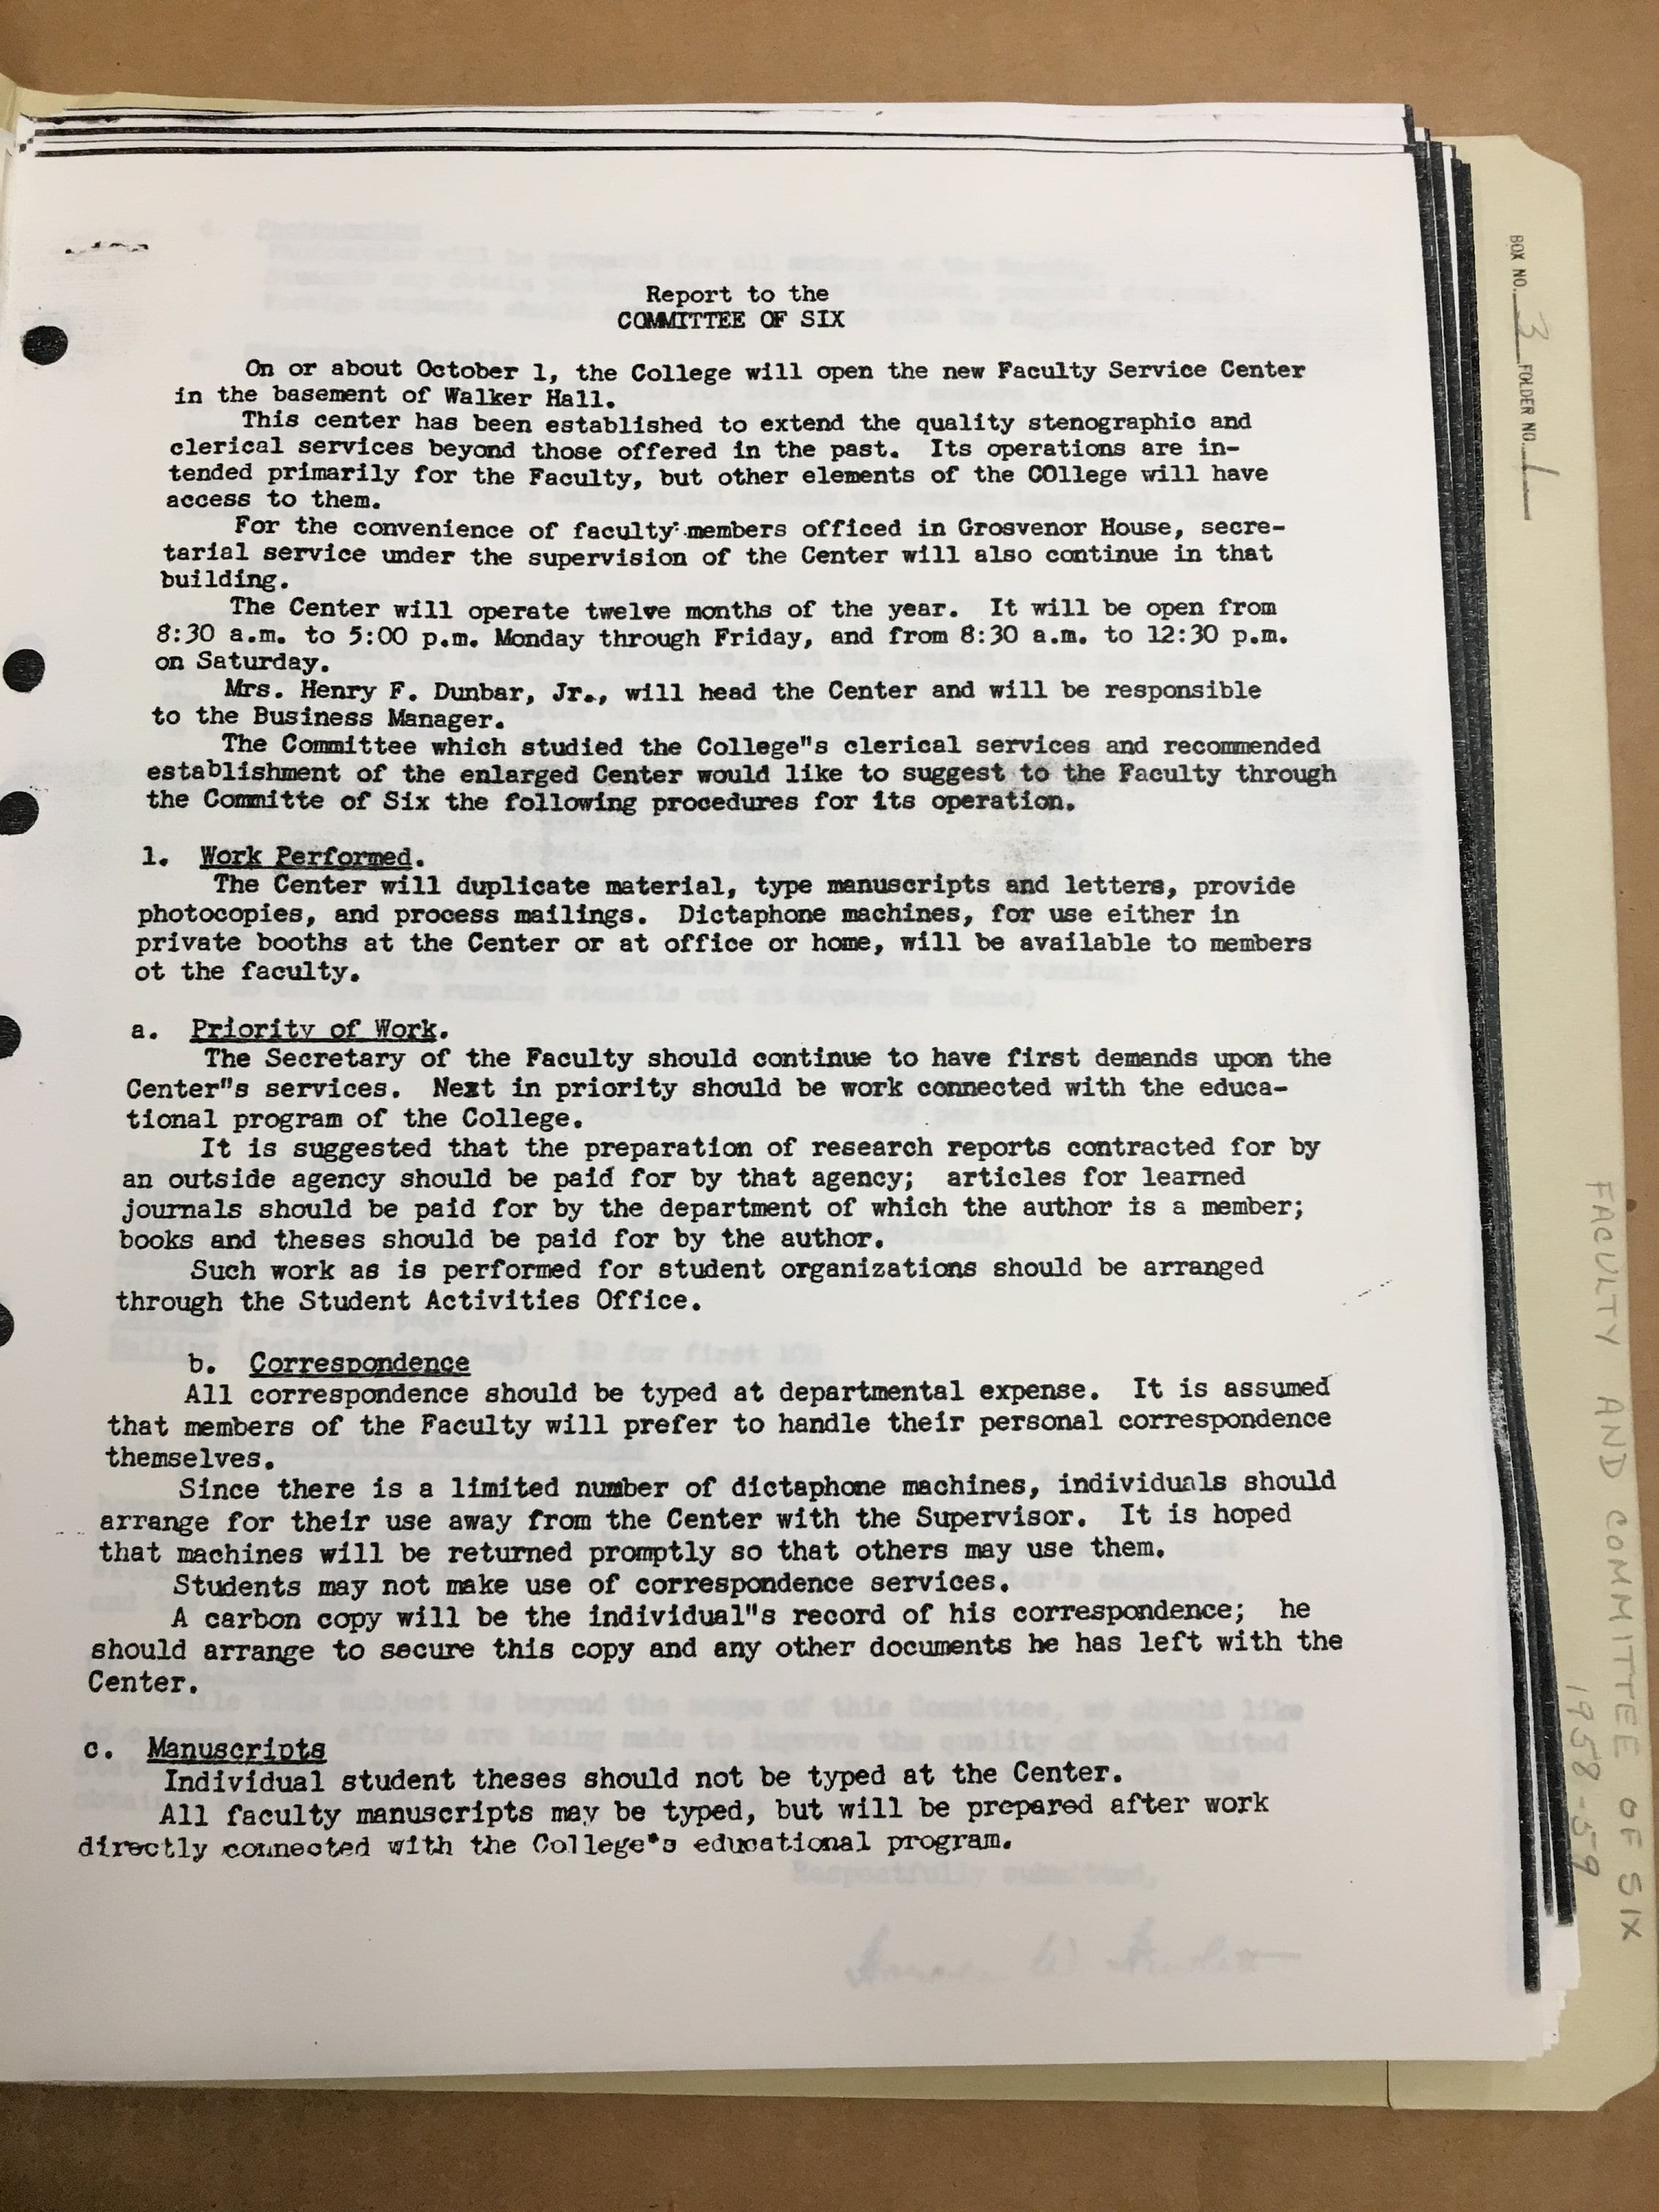 Dean of Faculty public meeting minutes & Committee of Six minutes, box 3 folder 1, 1958